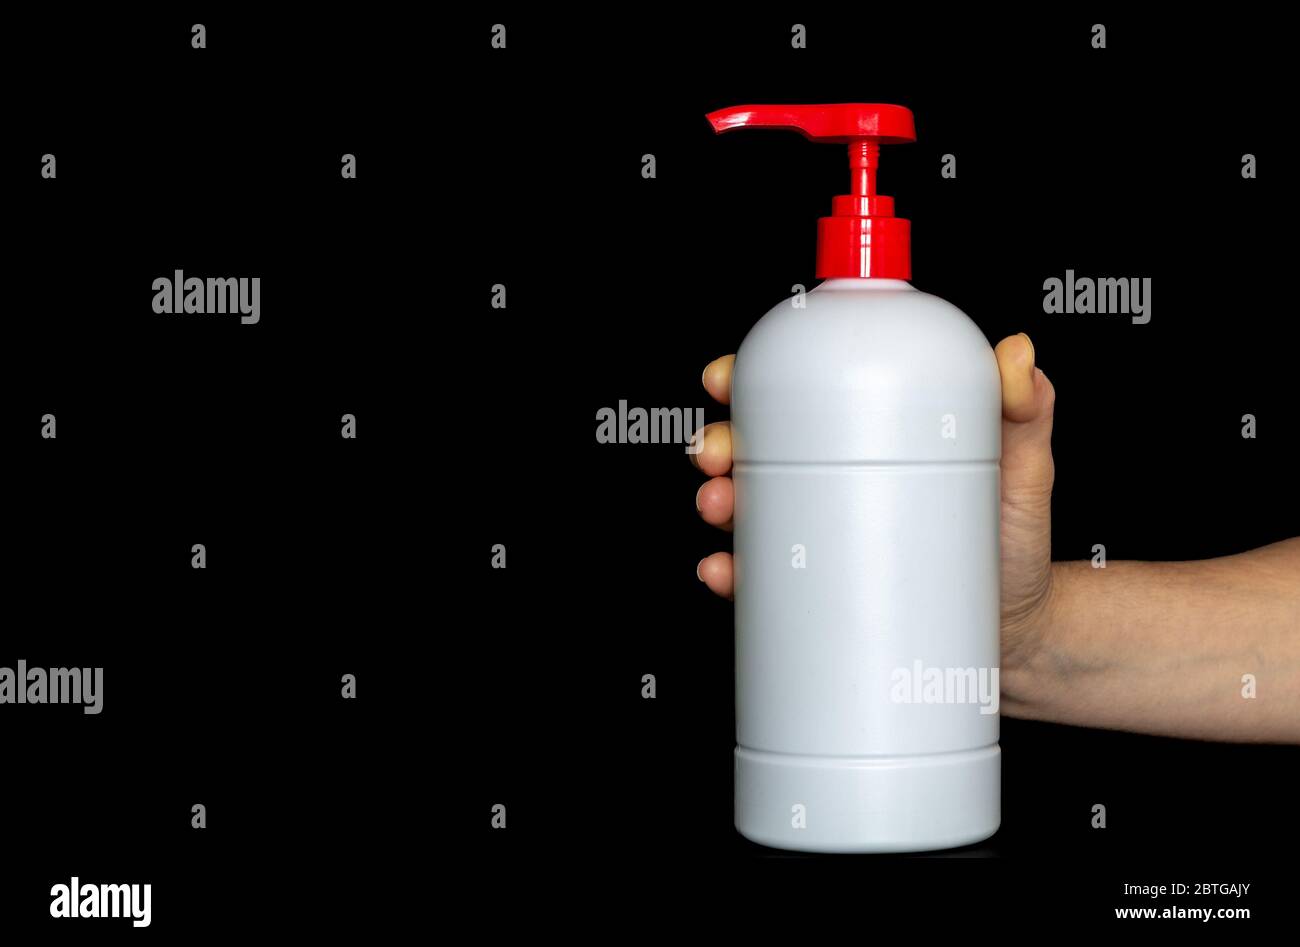 White plastic pushing pump bottle isolated on black background, woman is holding plastic bottle in her hand. Copy space advertising text area Stock Photo